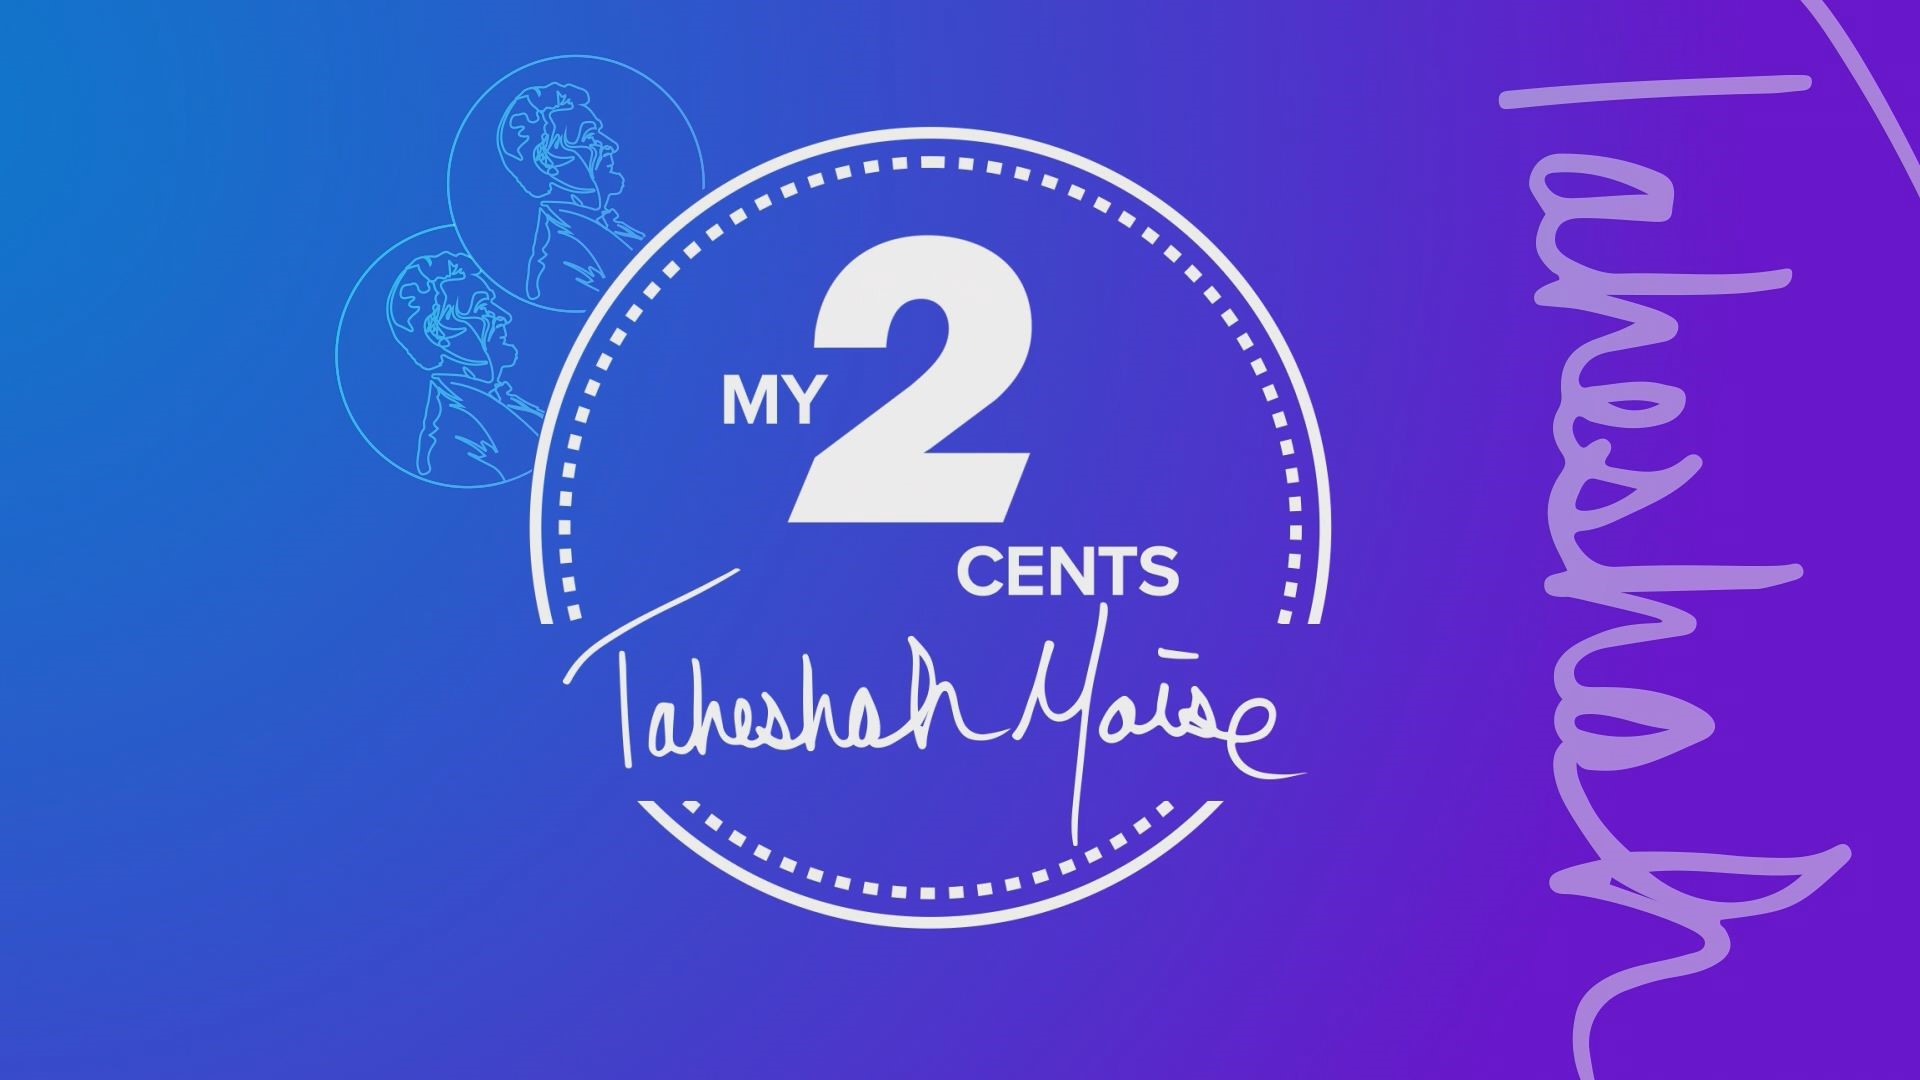 It’s important to be there for your friends at this time. Taheshah Moise gives her ‘2 Cents’ on how friendships may look different, but are even more important now.